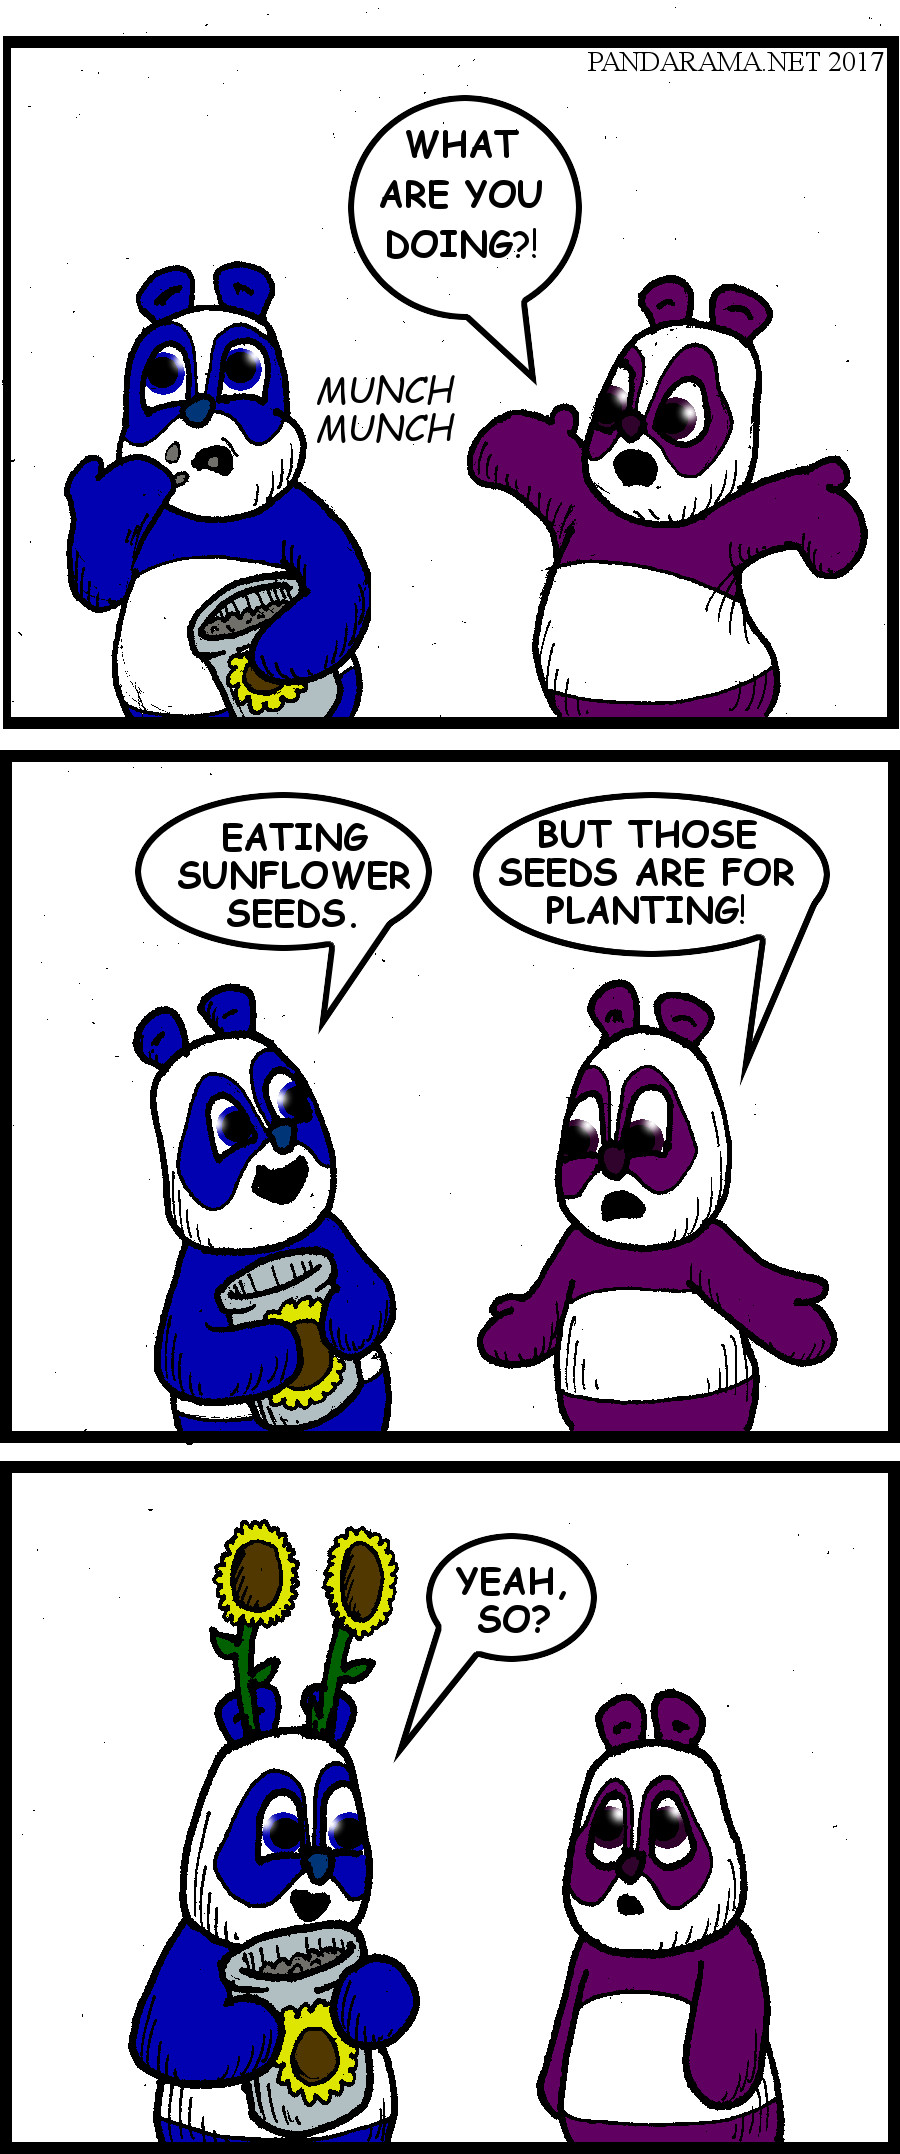 sunflower comicstrip. cartoon about sunflower seeds. comicstrip about sunflower seeds. panda eats sunflower seeds that were meant for plantiing and the sunflowers grow out of the panda's ears.